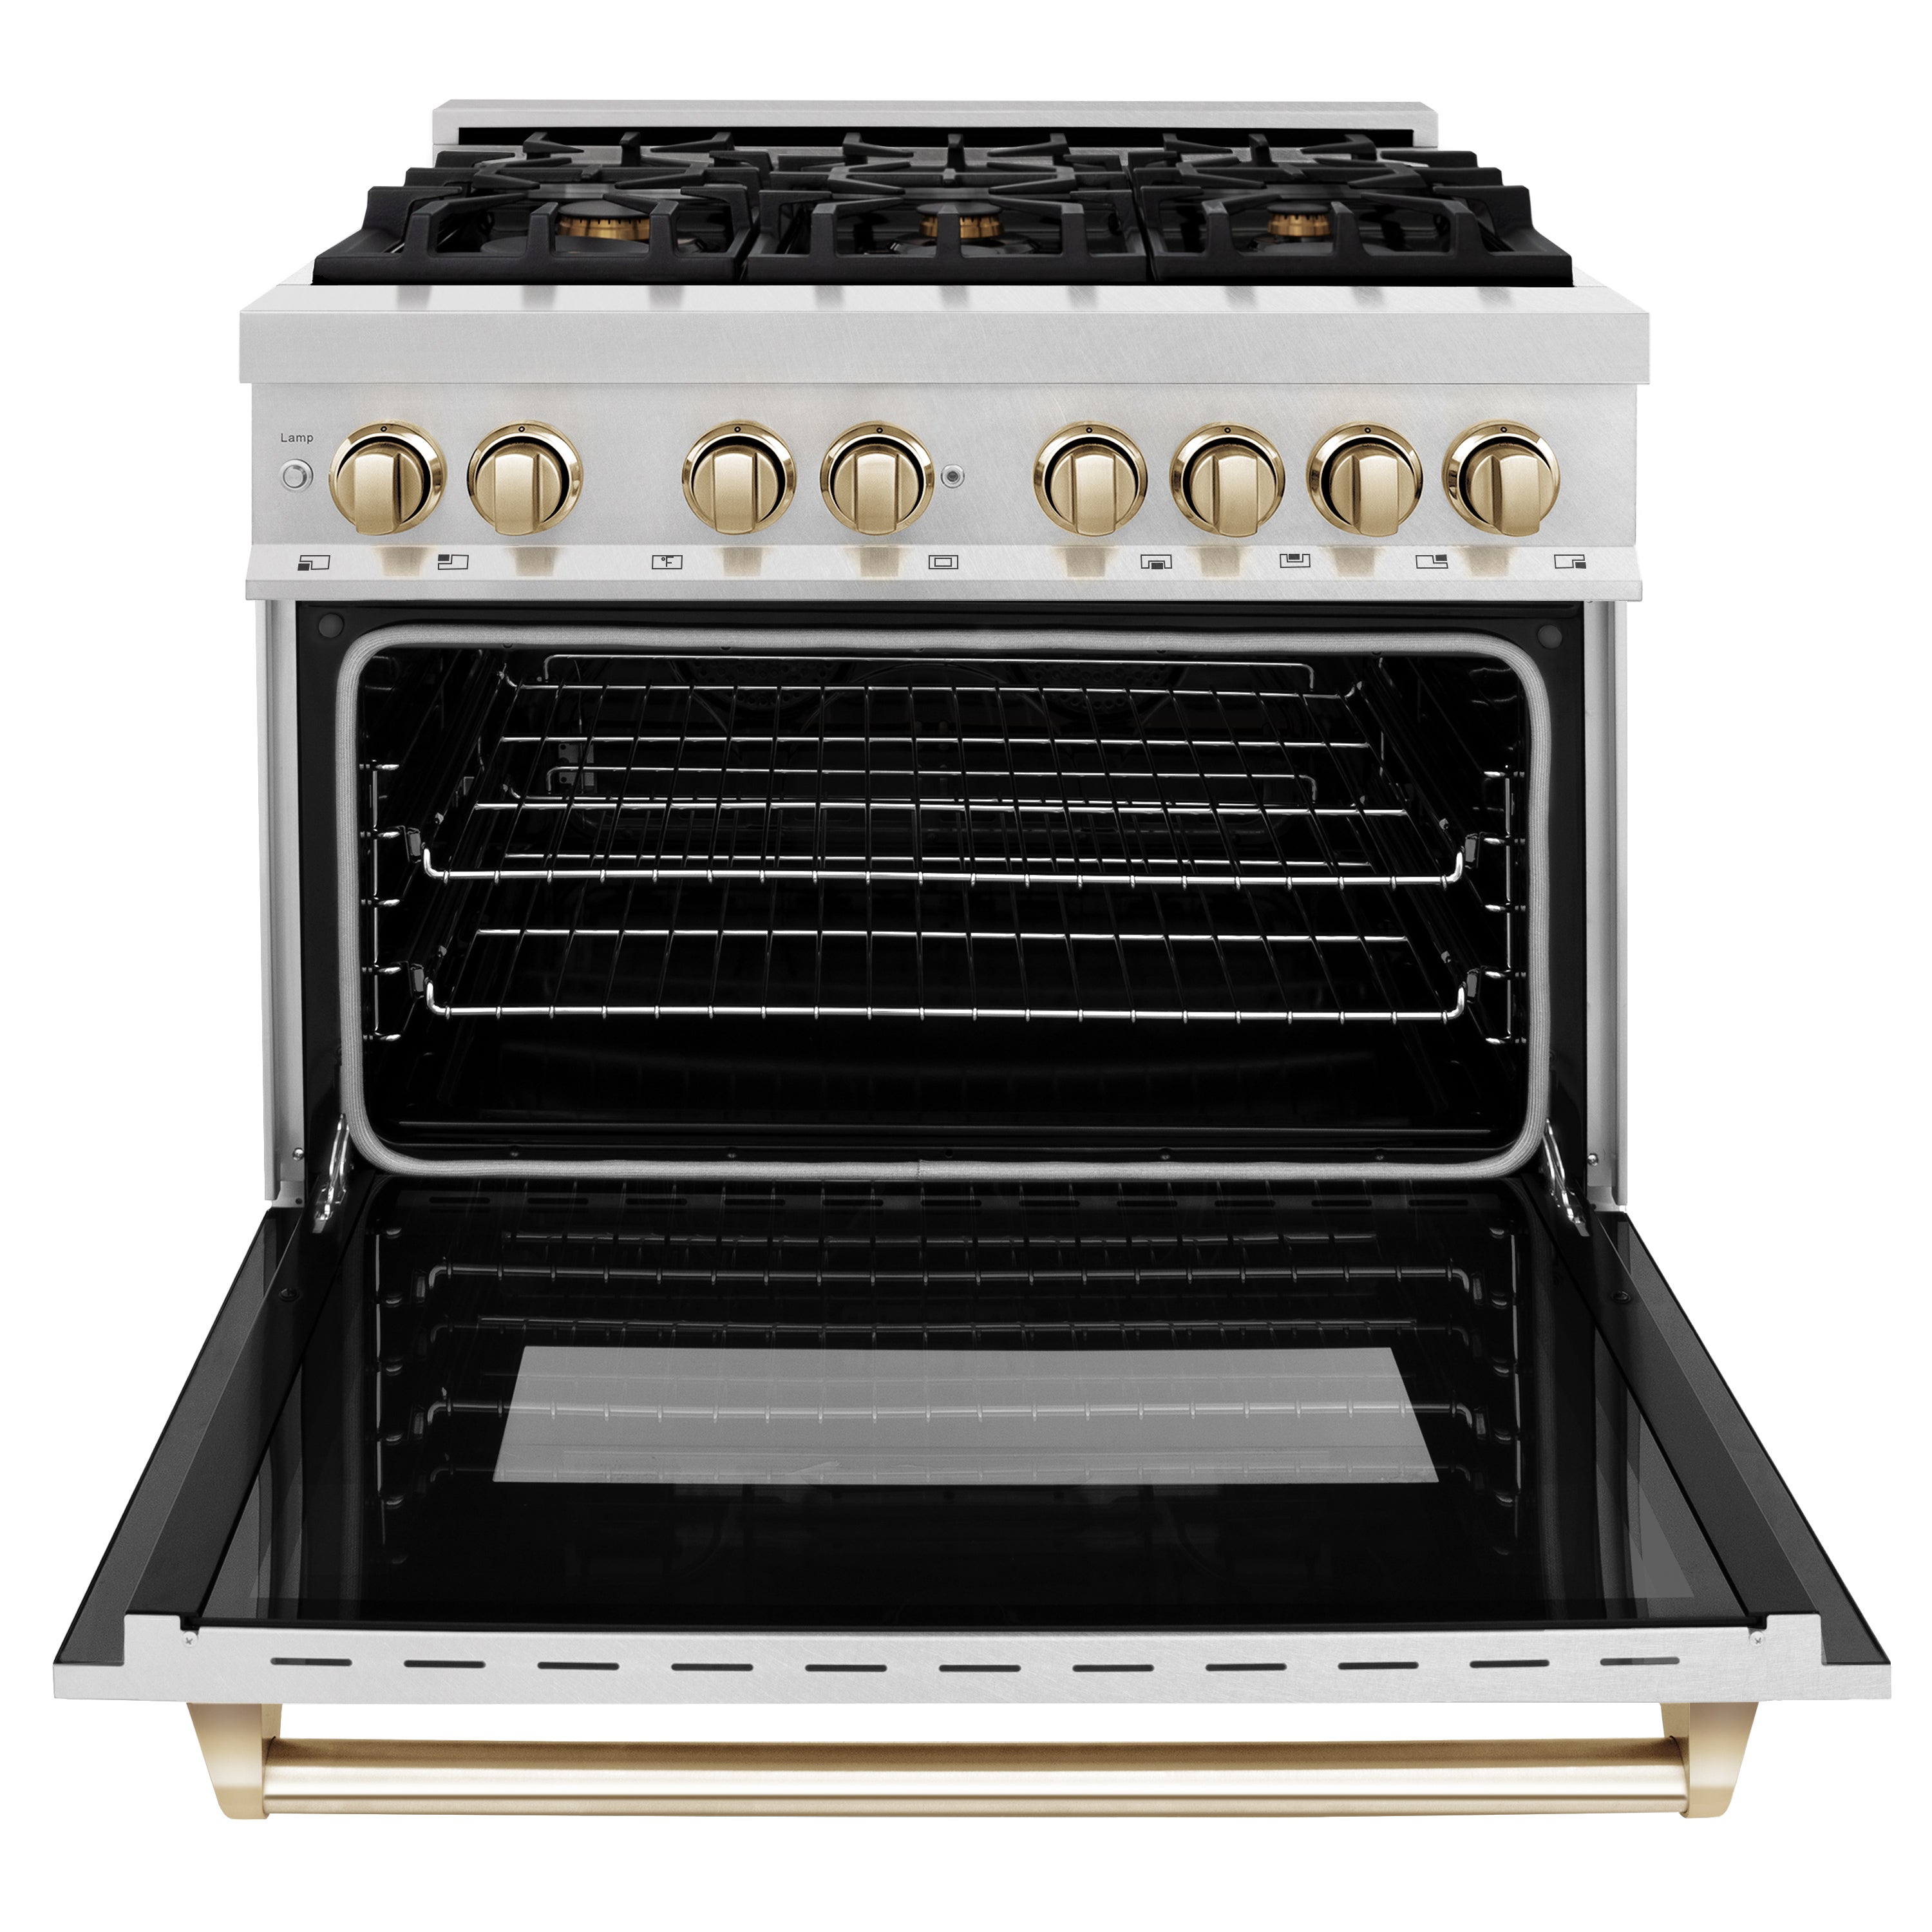 ZLINE Autograph Edition 36" 4.6 cu. ft. Dual Fuel Range with Gas Stove and Electric Oven in Fingerprint Resistant Stainless Steel with Polished Gold Accents (RASZ-SN-36-G)